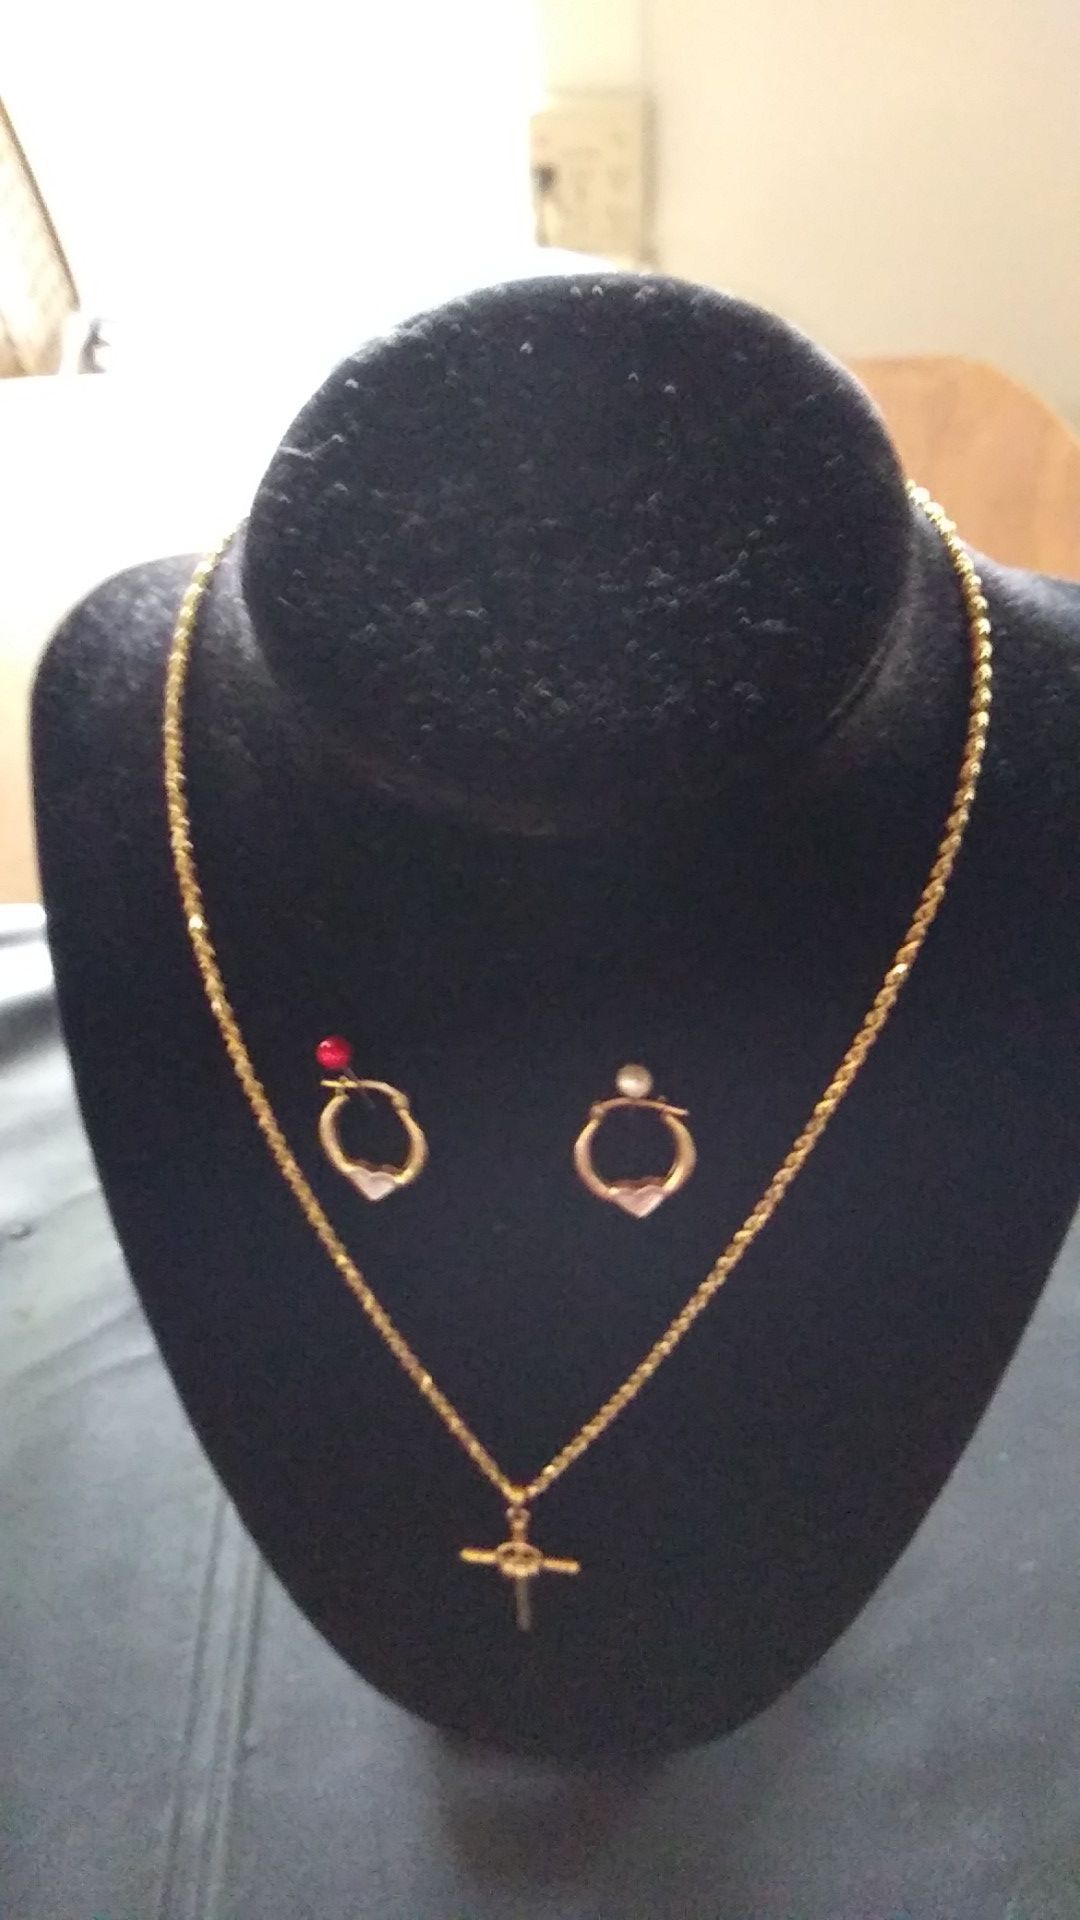 10k gold chain 16 inches and pendant and earings